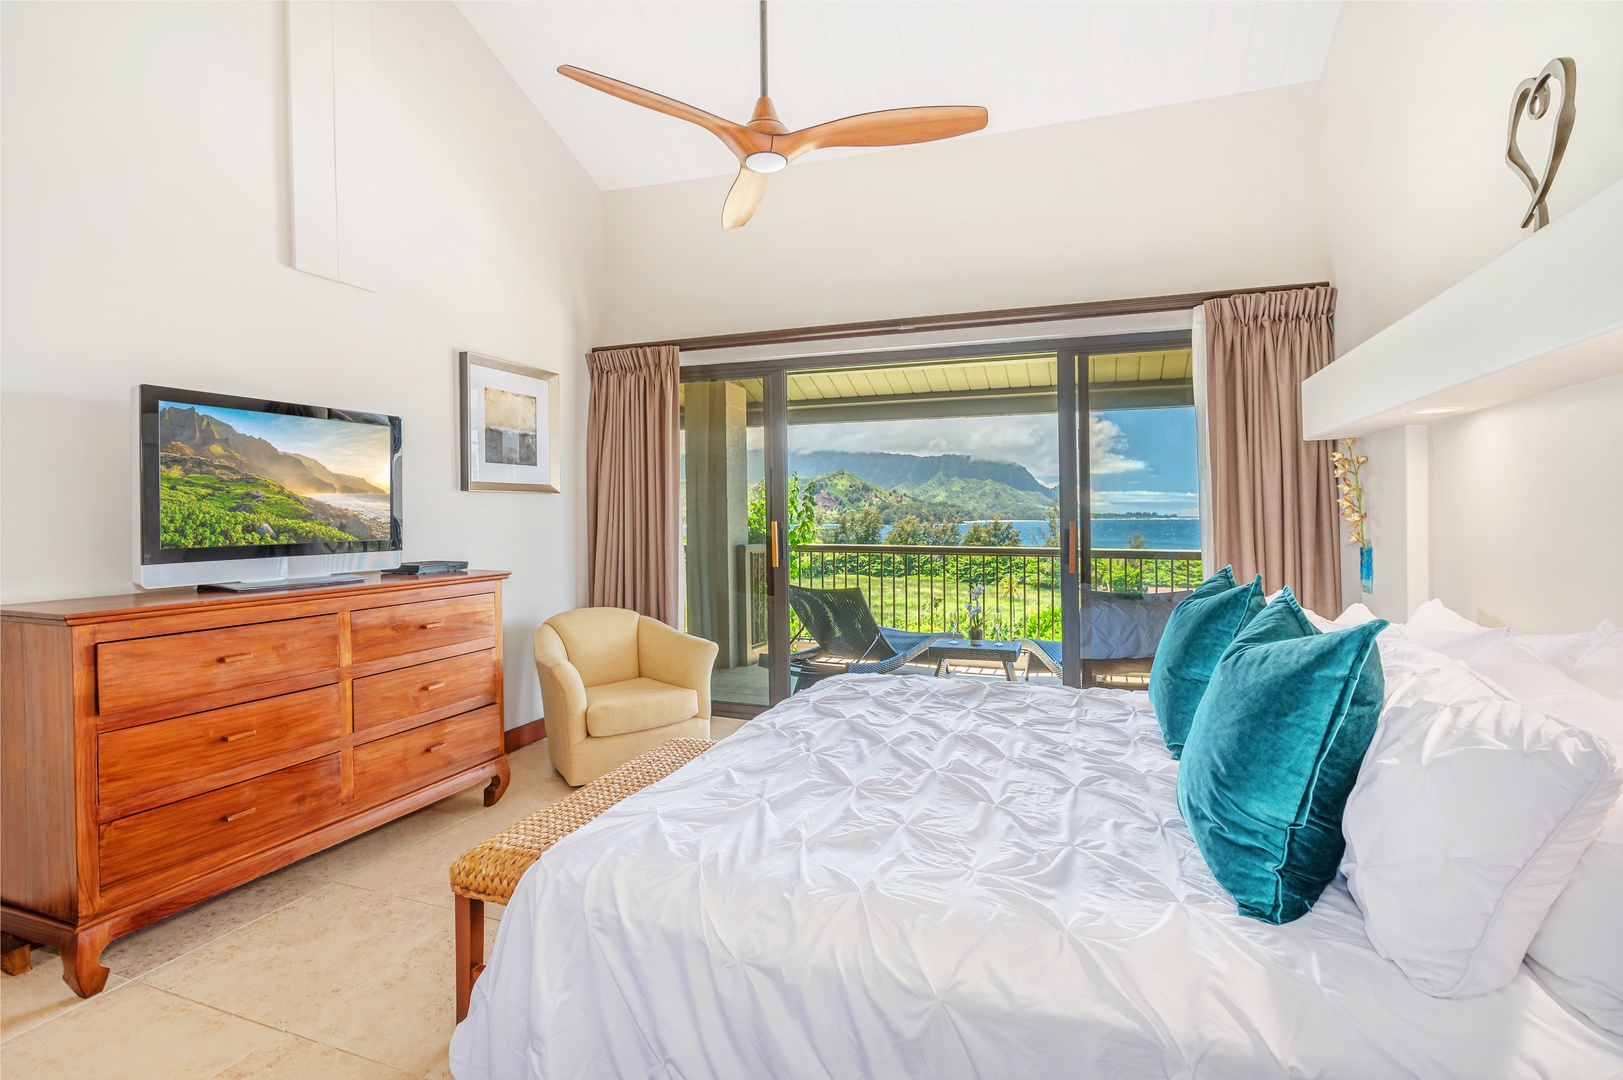 Princeville Vacation Rentals, Hanalei Bay Resort 7307 - Primary bedroom with flat screen TV and DVD player